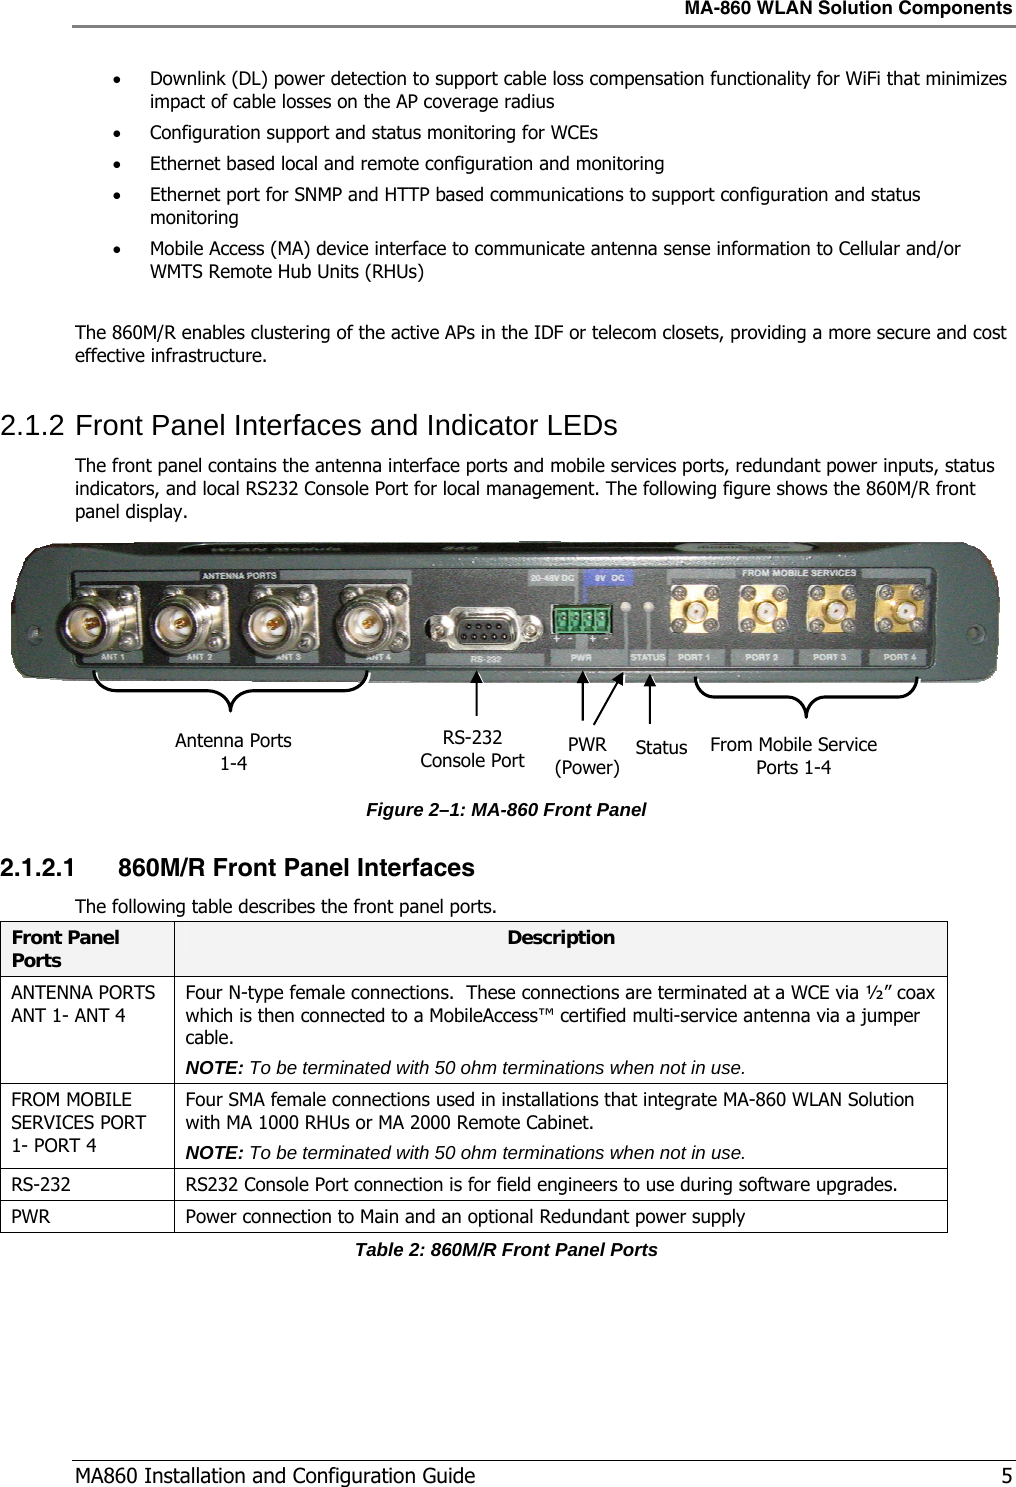 MA-860 WLAN Solution Components  MA860 Installation and Configuration Guide   5 • Downlink (DL) power detection to support cable loss compensation functionality for WiFi that minimizes  impact of cable losses on the AP coverage radius • Configuration support and status monitoring for WCEs • Ethernet based local and remote configuration and monitoring • Ethernet port for SNMP and HTTP based communications to support configuration and status monitoring • Mobile Access (MA) device interface to communicate antenna sense information to Cellular and/or WMTS Remote Hub Units (RHUs)  The 860M/R enables clustering of the active APs in the IDF or telecom closets, providing a more secure and cost effective infrastructure.  2.1.2 Front Panel Interfaces and Indicator LEDs The front panel contains the antenna interface ports and mobile services ports, redundant power inputs, status indicators, and local RS232 Console Port for local management. The following figure shows the 860M/R front panel display.    Figure  2–1: MA-860 Front Panel 2.1.2.1 860M/R Front Panel Interfaces The following table describes the front panel ports. Front Panel Ports  Description ANTENNA PORTS ANT 1- ANT 4 Four N-type female connections.  These connections are terminated at a WCE via ½” coax which is then connected to a MobileAccess™ certified multi-service antenna via a jumper cable. NOTE: To be terminated with 50 ohm terminations when not in use. FROM MOBILE SERVICES PORT 1- PORT 4 Four SMA female connections used in installations that integrate MA-860 WLAN Solution with MA 1000 RHUs or MA 2000 Remote Cabinet.  NOTE: To be terminated with 50 ohm terminations when not in use. RS-232  RS232 Console Port connection is for field engineers to use during software upgrades. PWR  Power connection to Main and an optional Redundant power supply Table 2: 860M/R Front Panel Ports From Mobile Service Ports 1-4 PWR (Power) StatusRS-232 Console Port Antenna Ports 1-4 